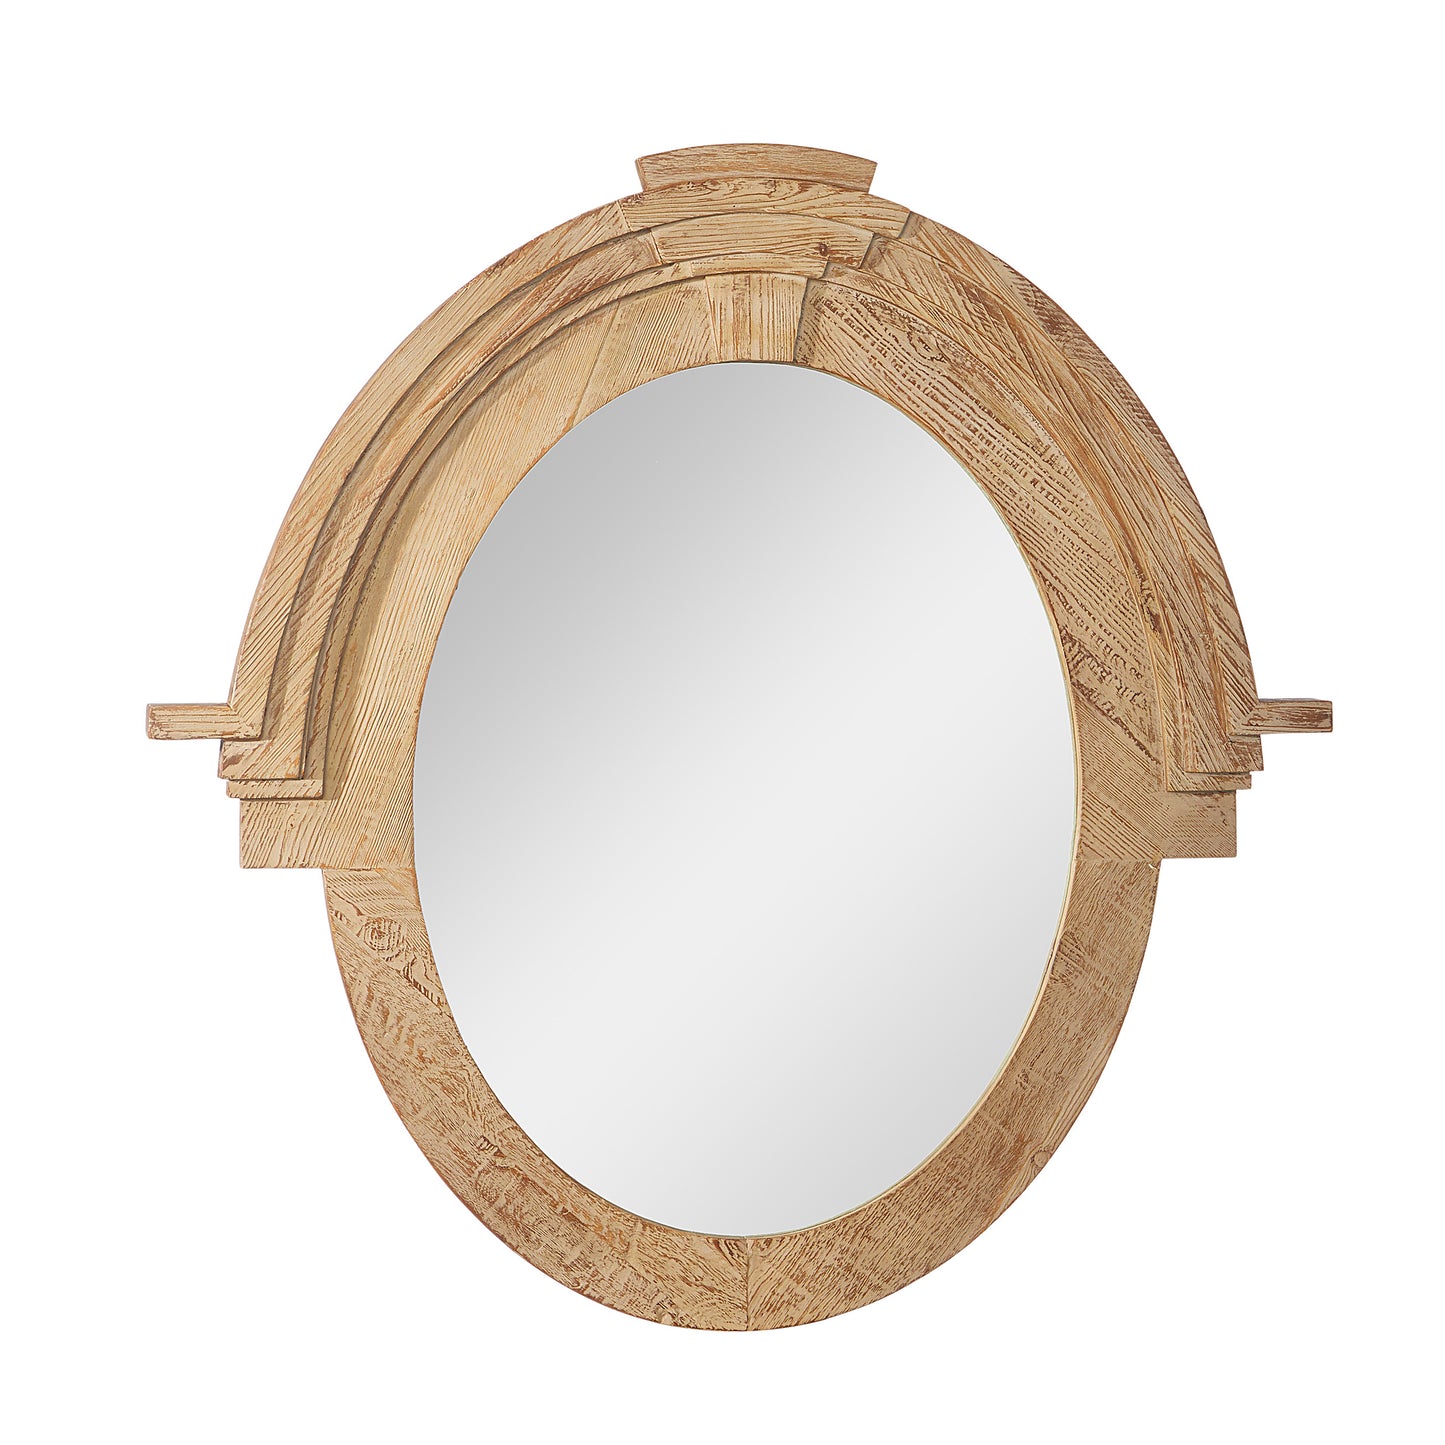 Natural Oval Mirror